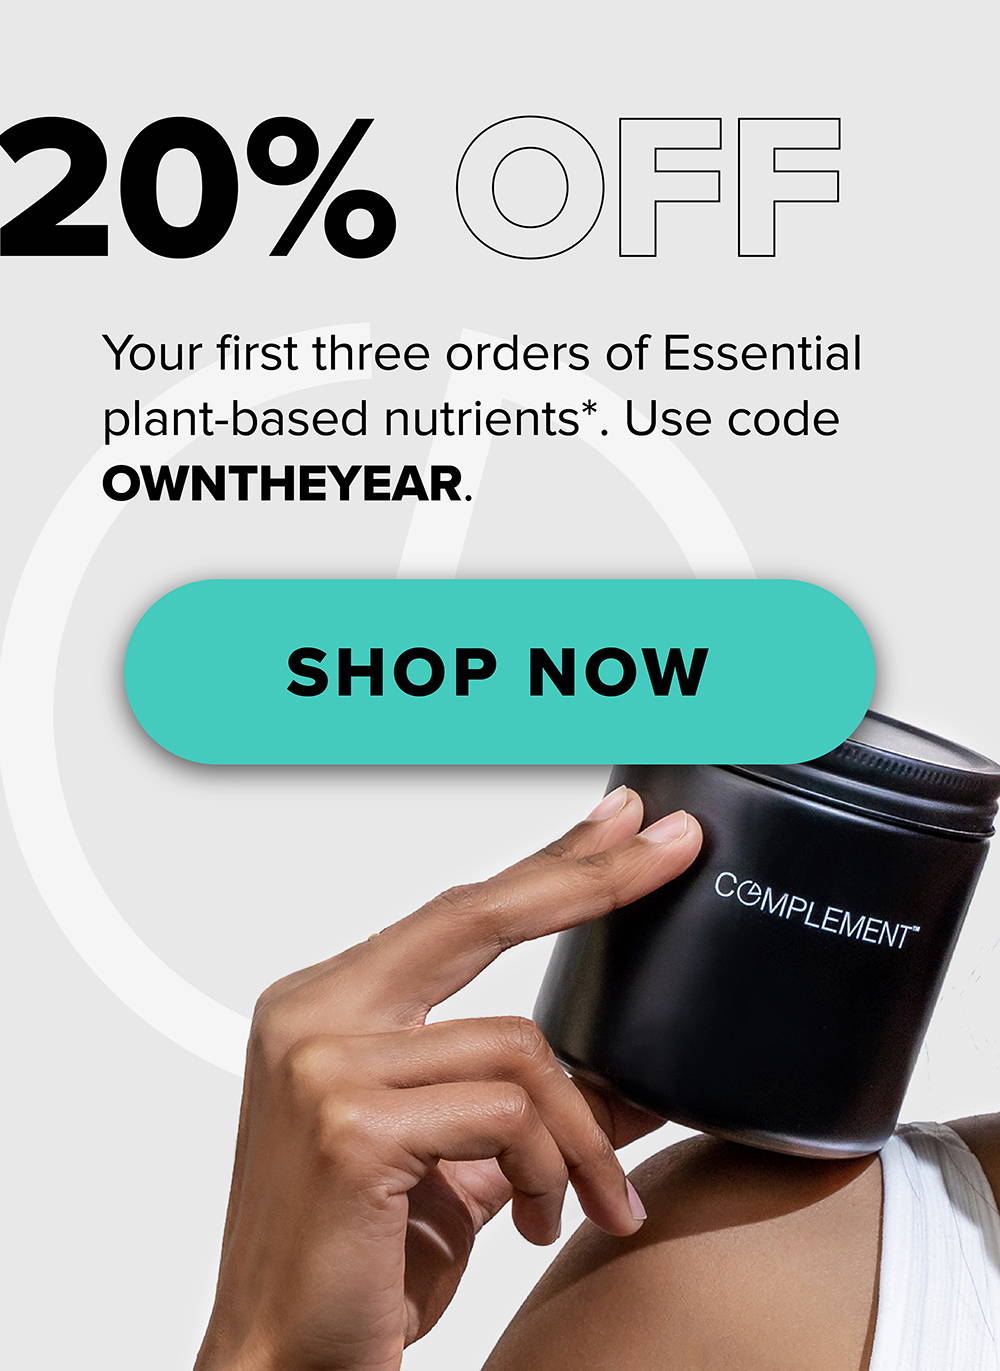 20% OFF Your first three orders of Essential plant-based nutrients*. Use code OWNTHEYEAR.